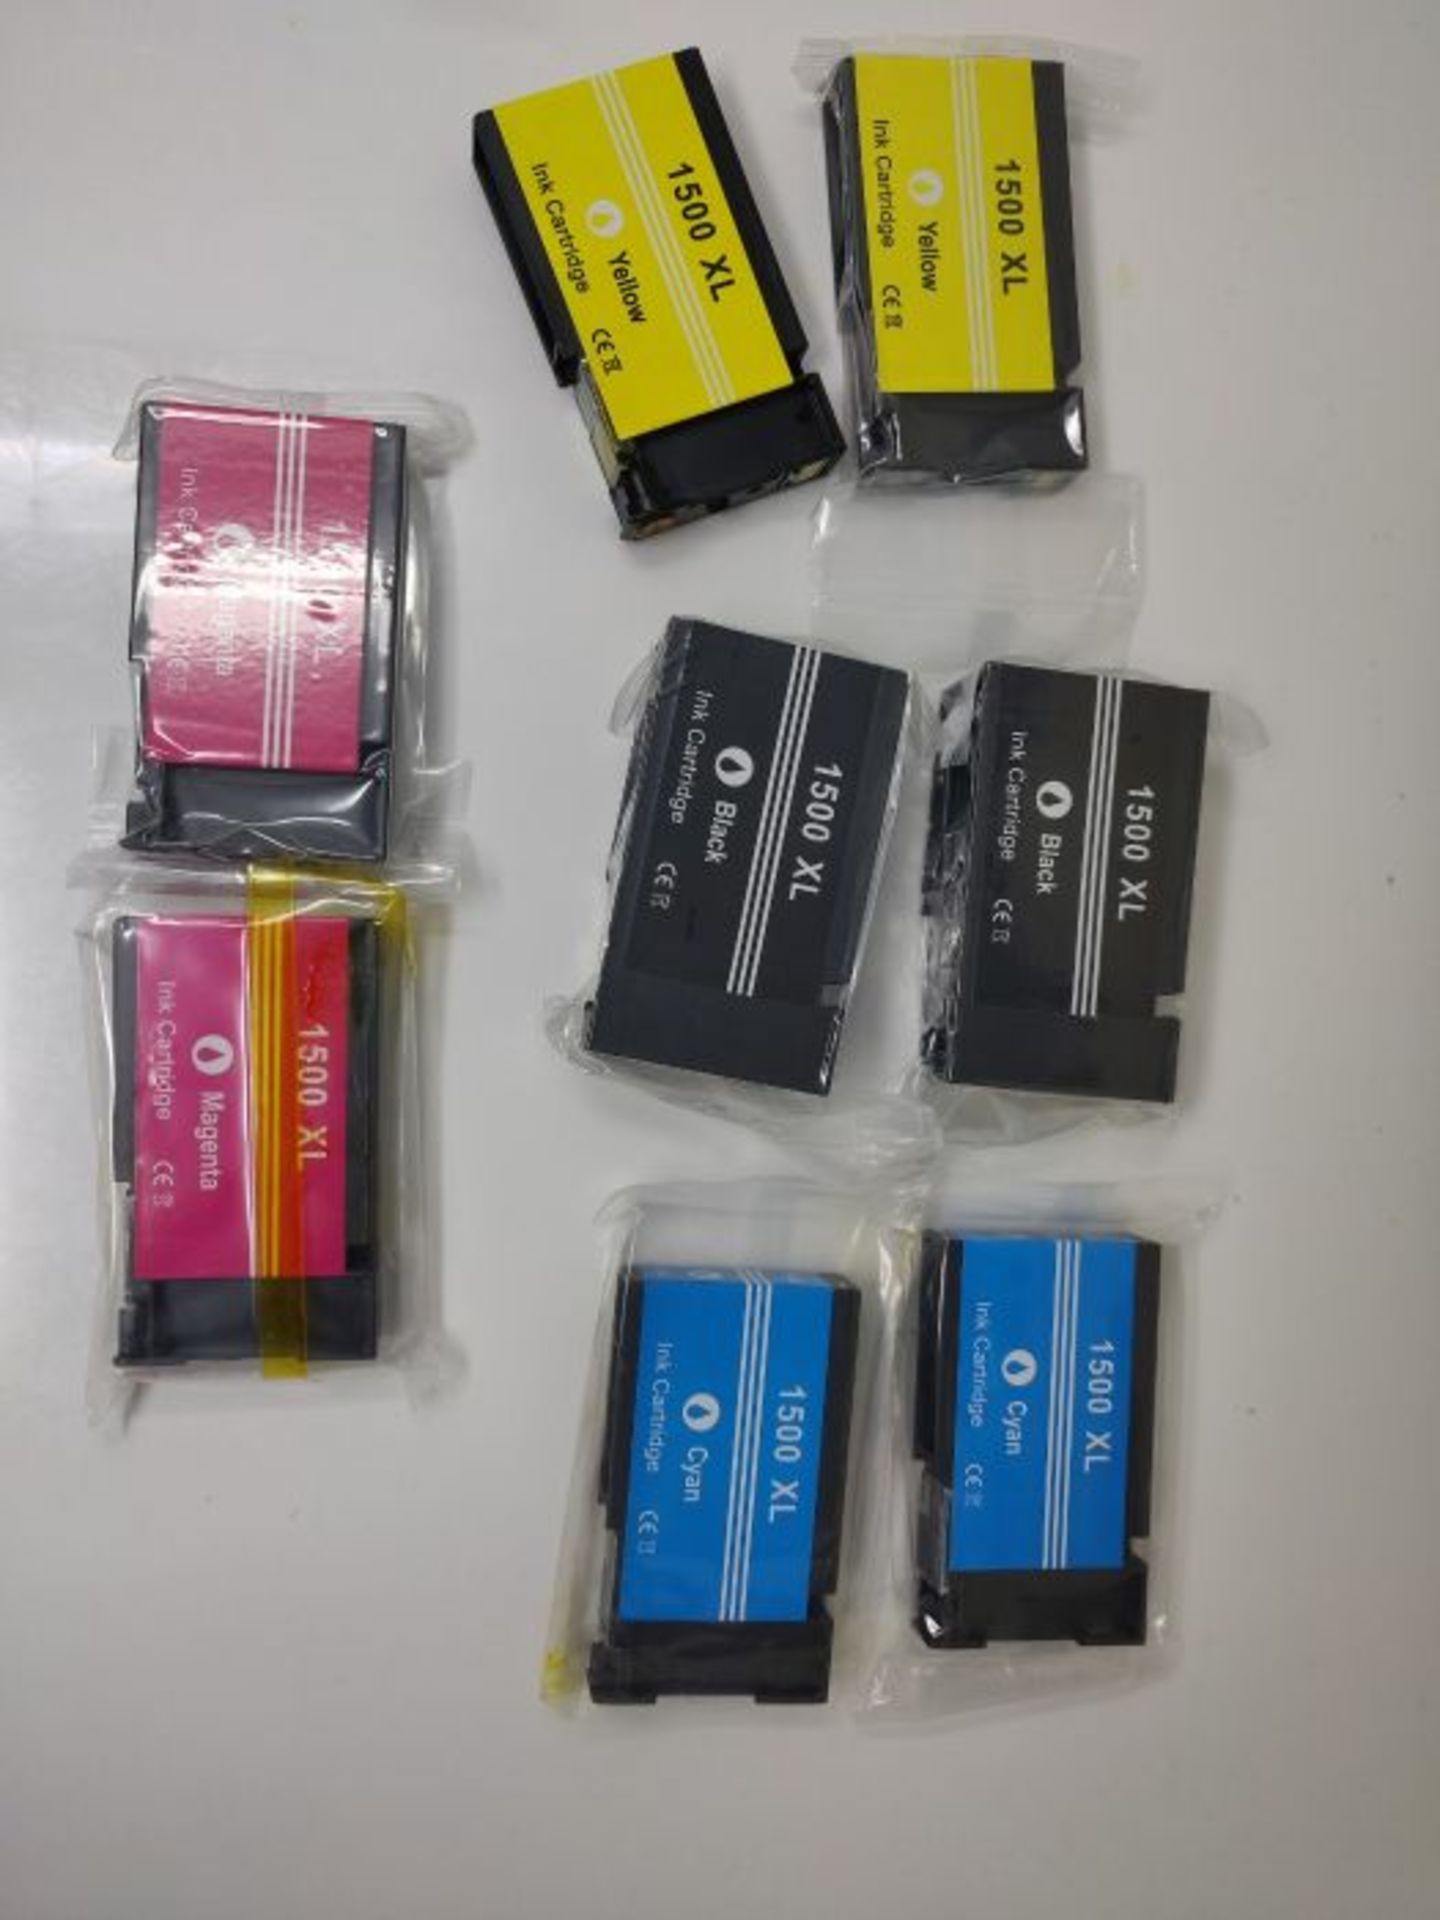 8 (2 SETS) Compatible Printer Ink Cartridges for Canon Maxify MB2000 Series, MB2050, M - Image 2 of 2